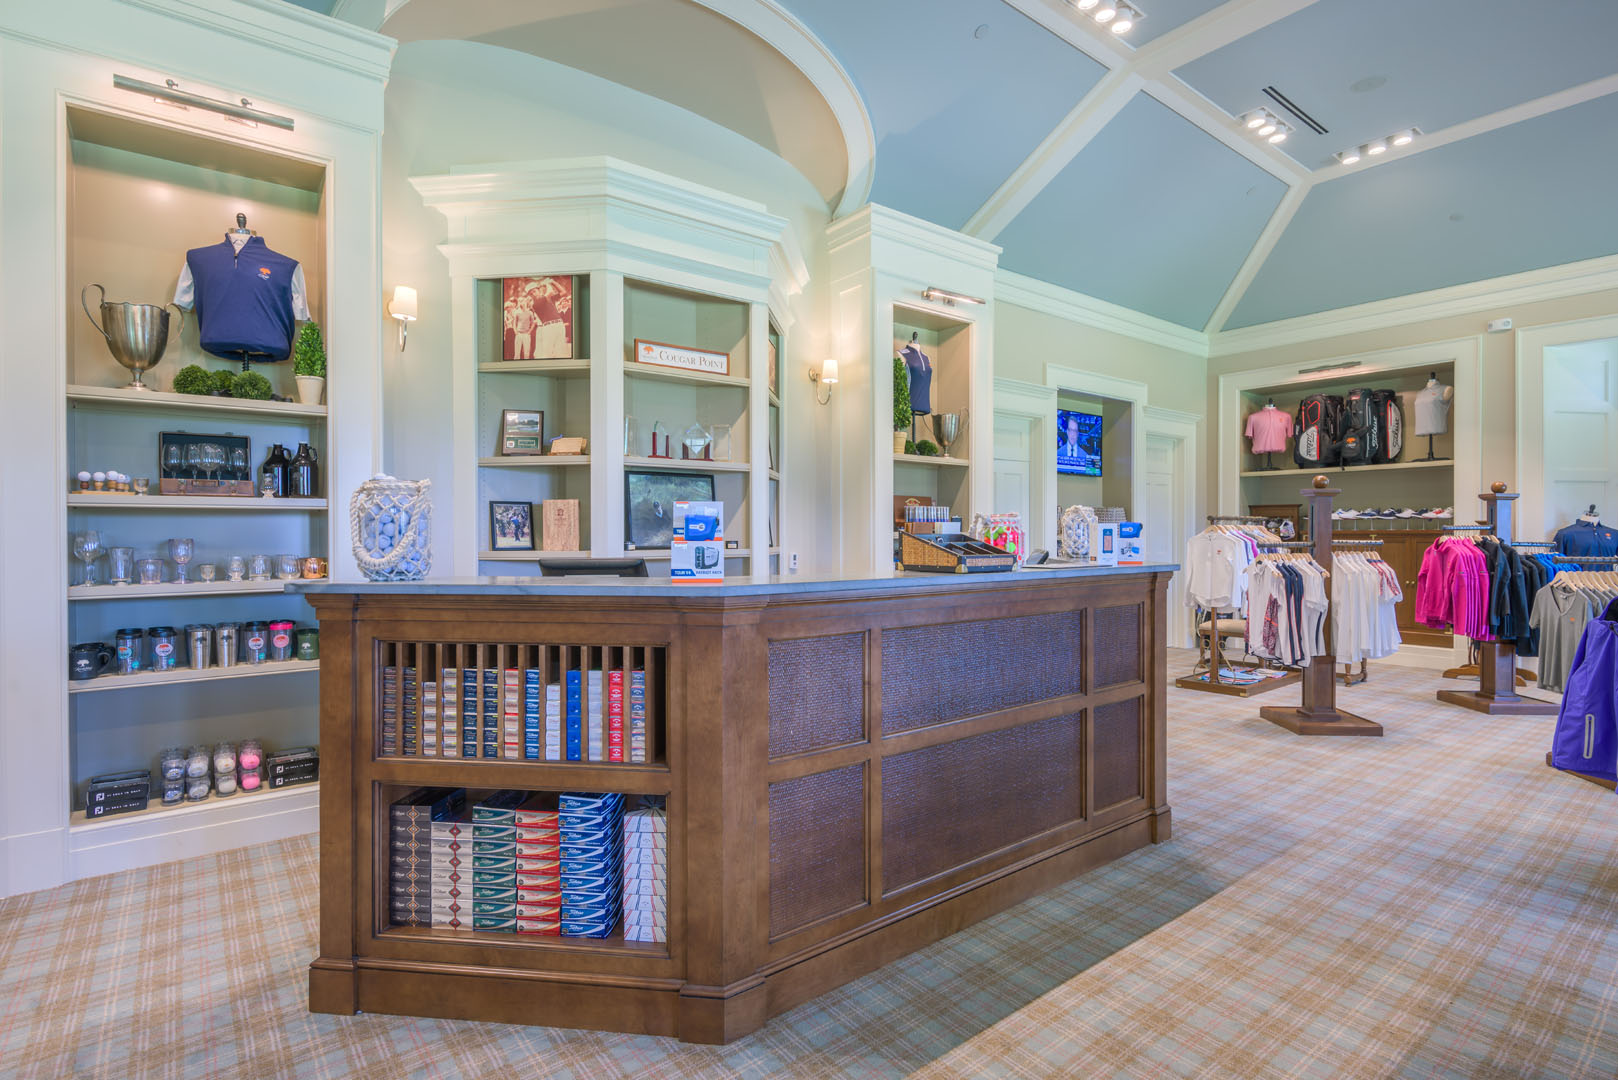 Kiawah Cougar Point Clubhouse Image #5